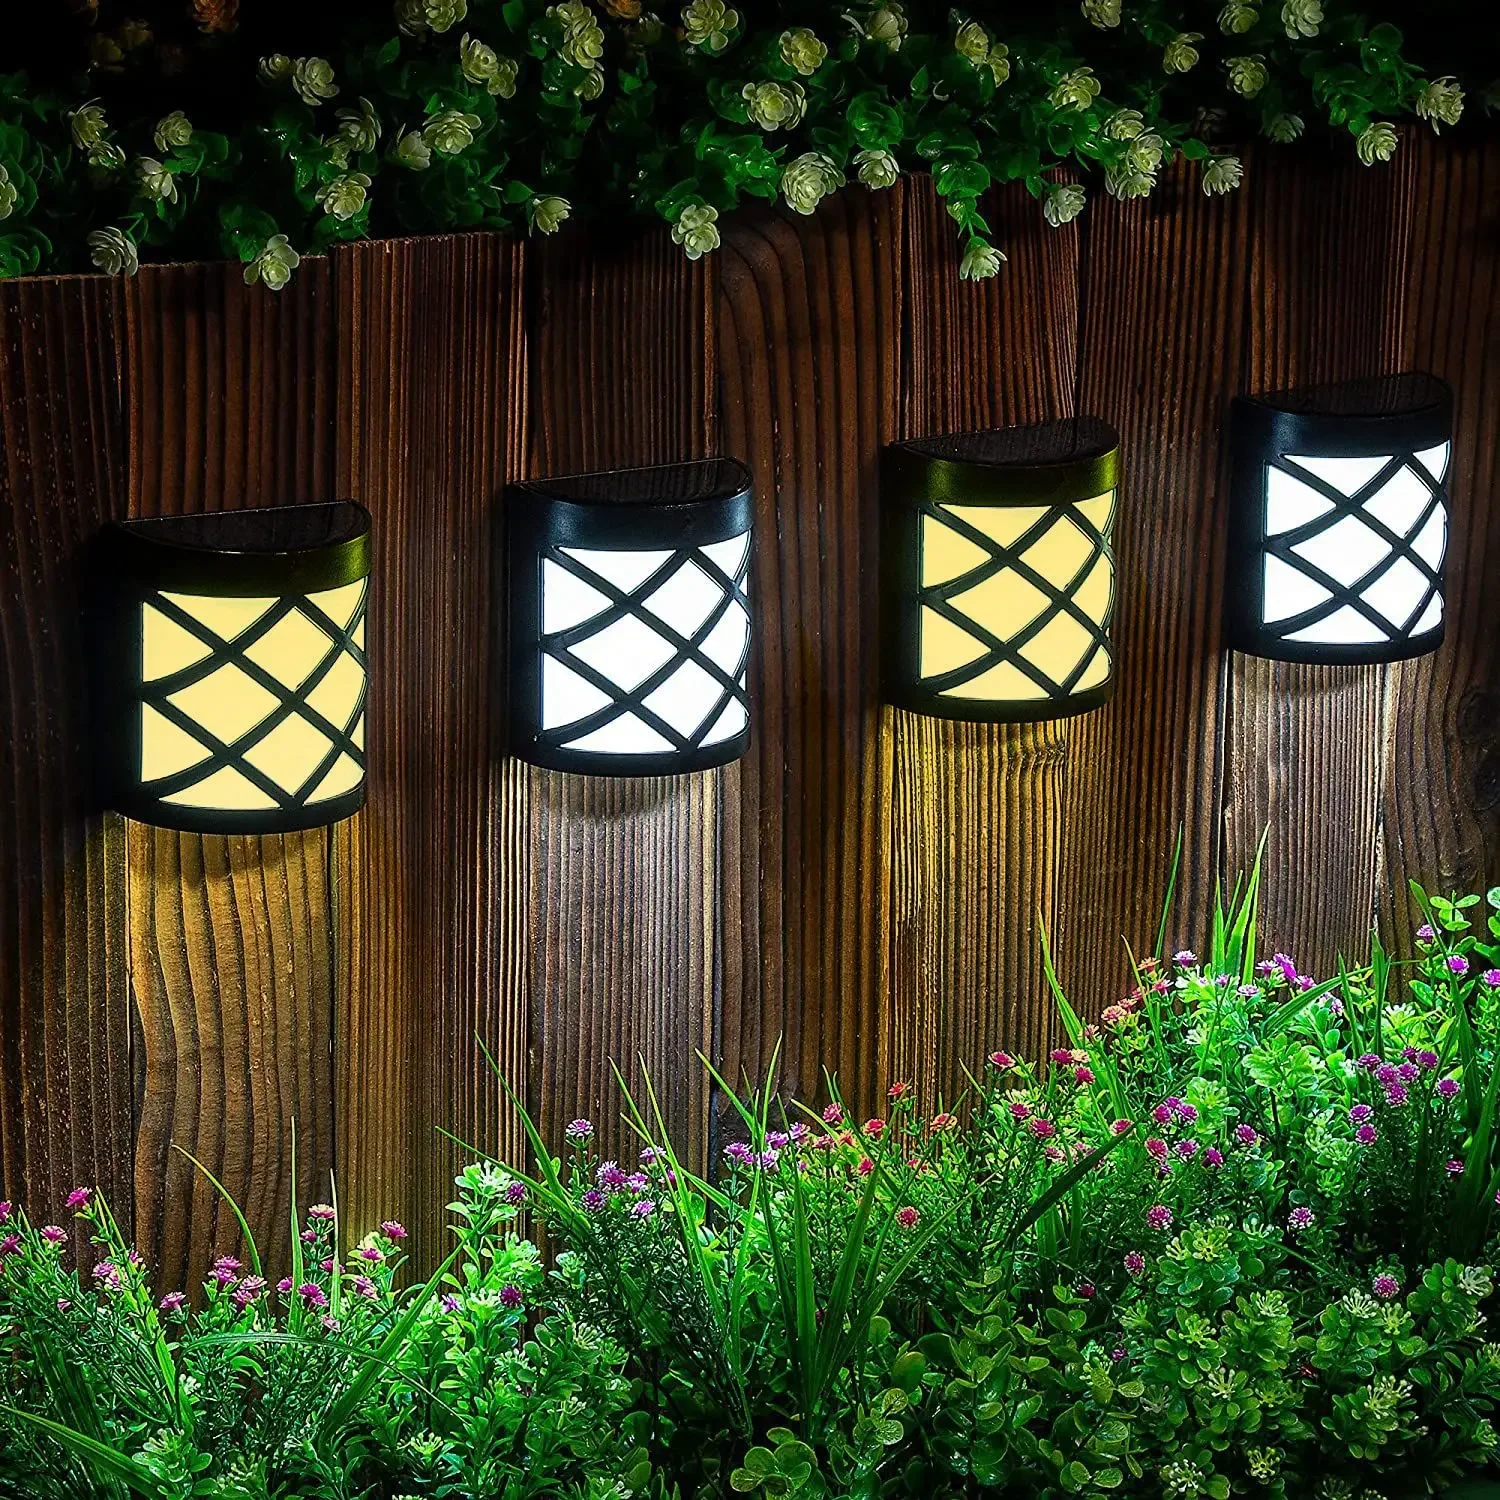 

6 LED Solar Fence Lights Outdoor Solar Deck Lights 7 Colors Changing Waterproof Wall Lamp for Fence Patio Yard Step Garden Decor